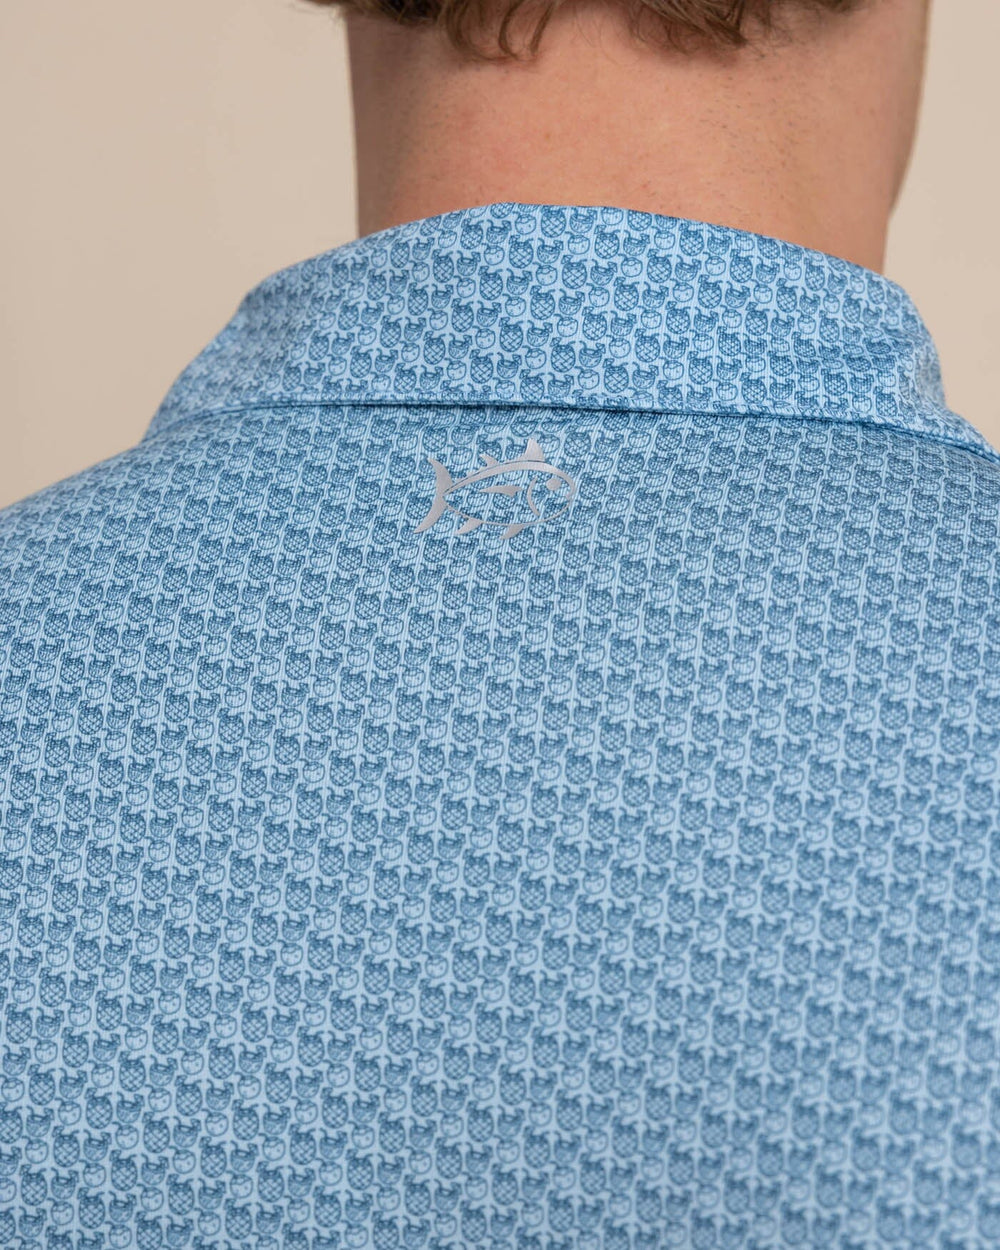 The detail view of the Southern Tide Driver Vacation Views Printed Polo by Southern Tide - Clearwater Blue